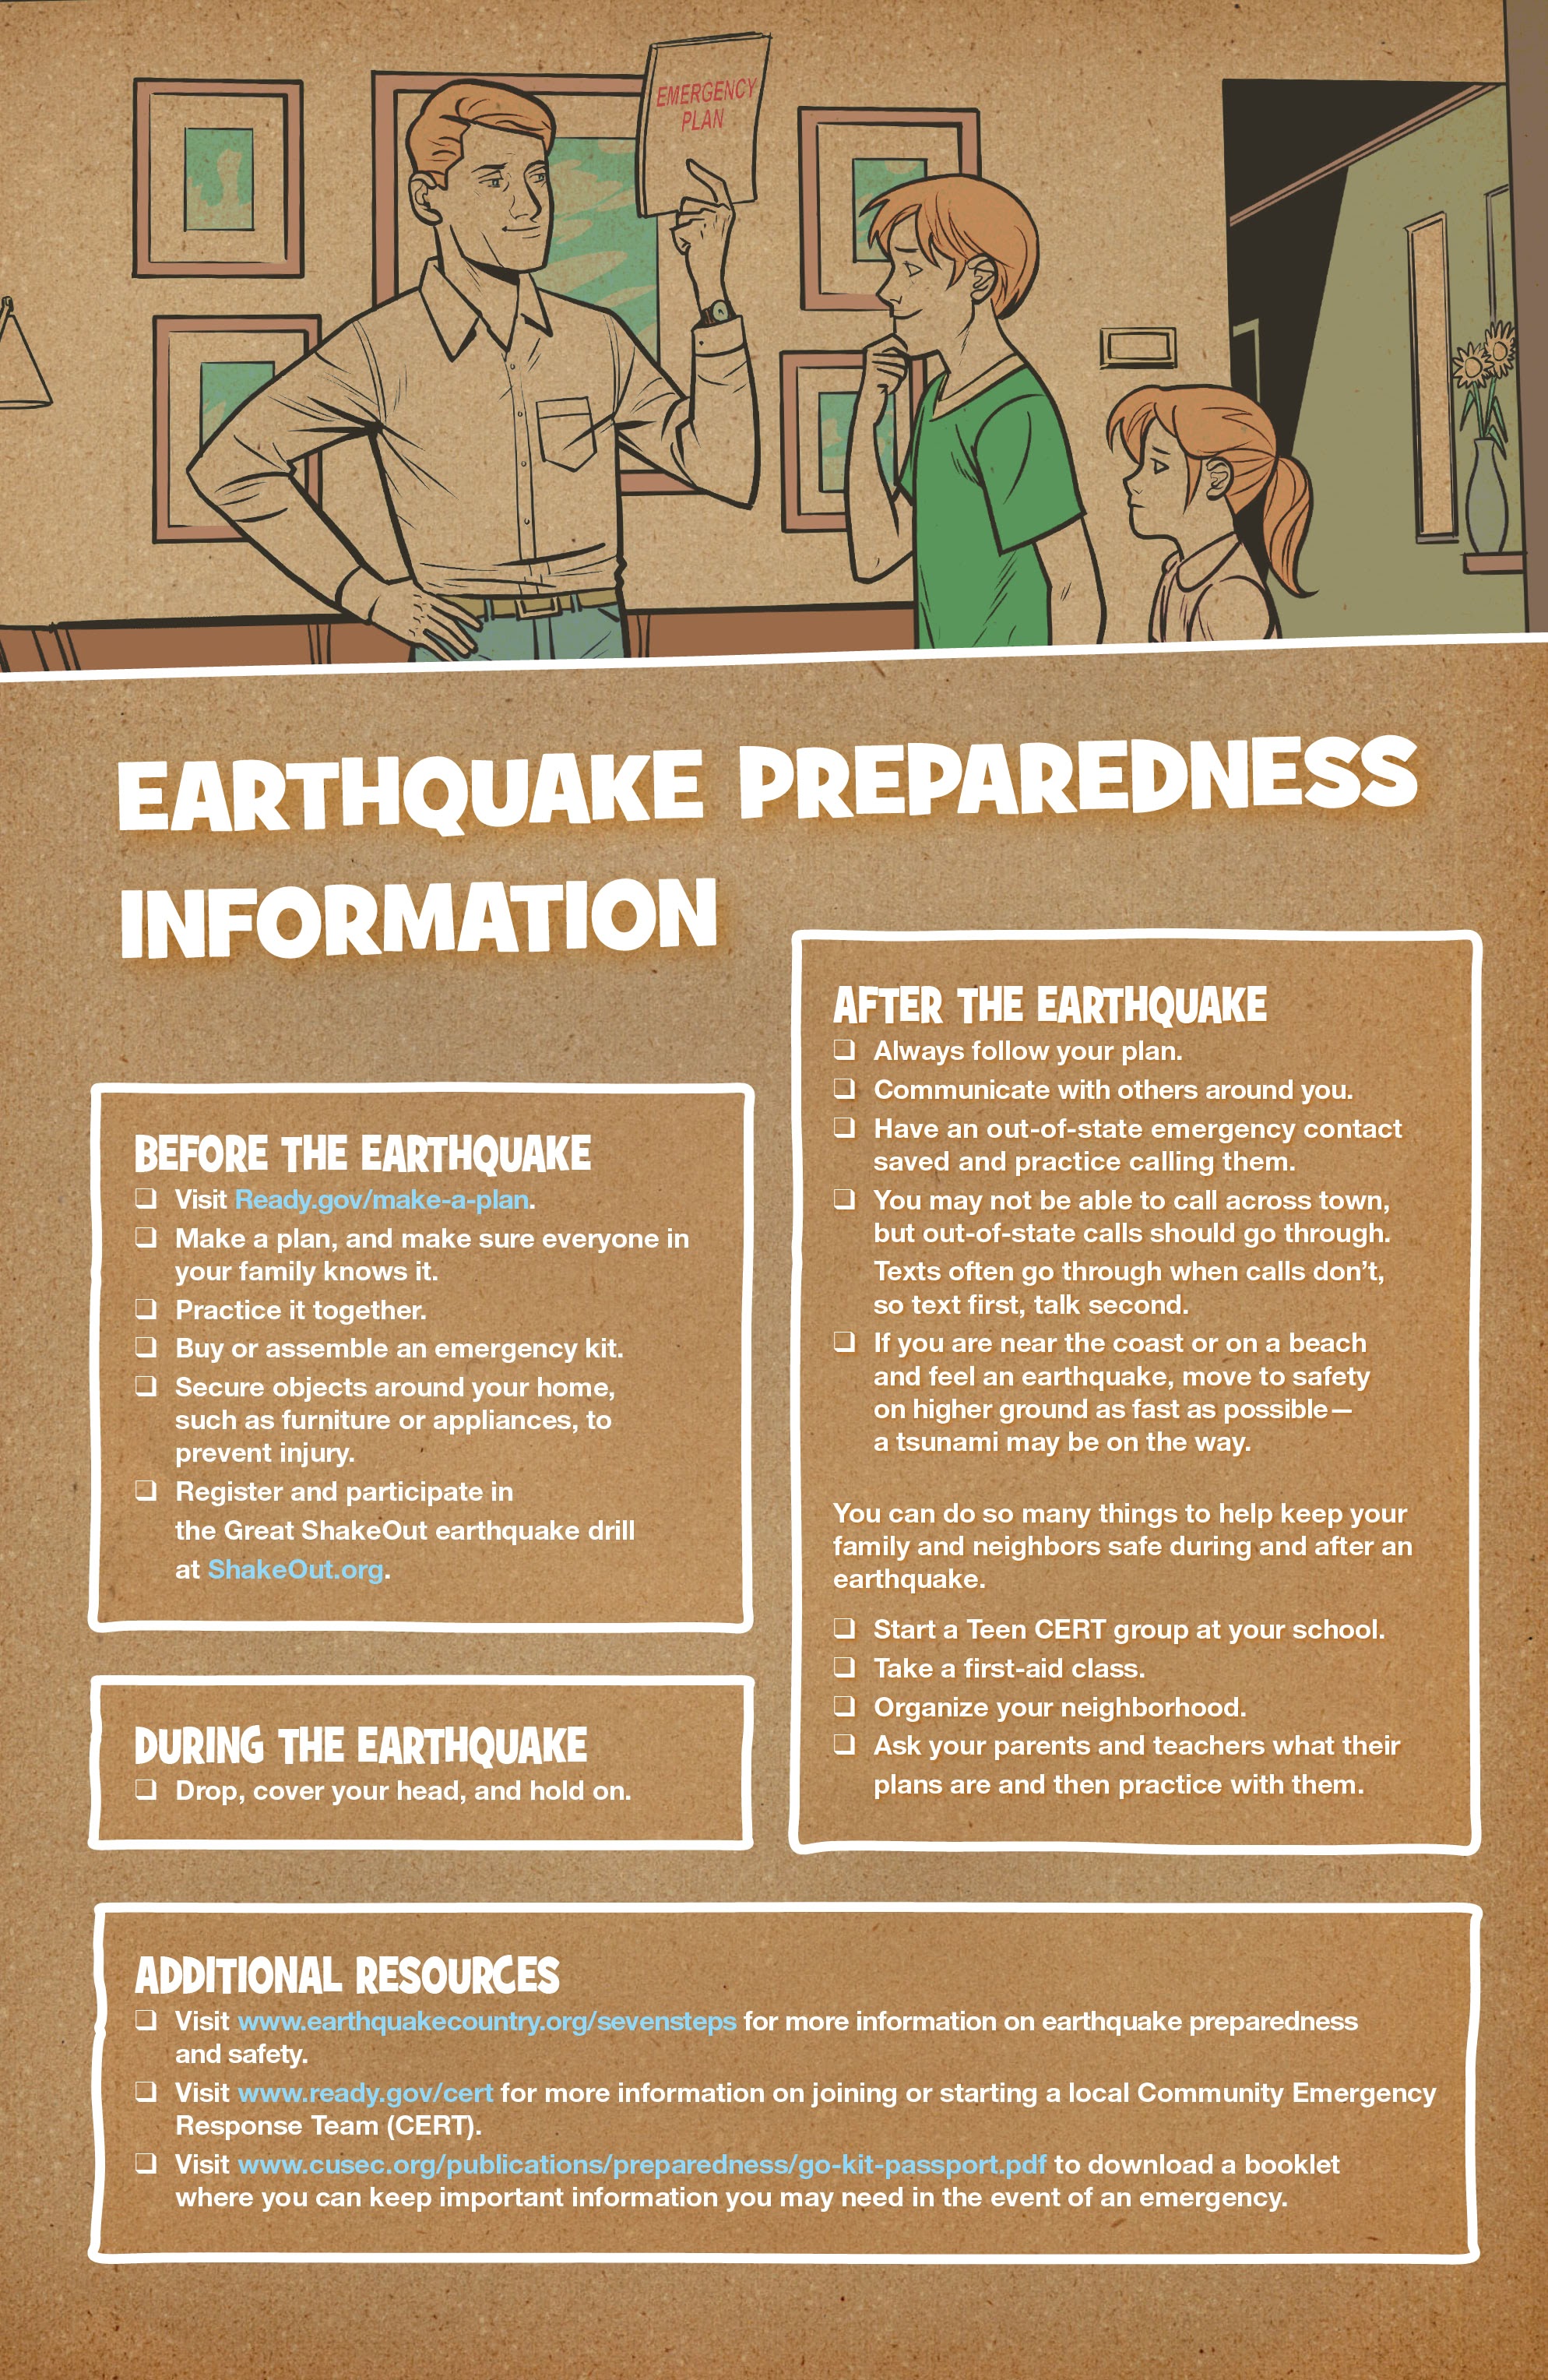 Read online Without Warning! comic -  Issue # Earthquake (CUSEC) - 13